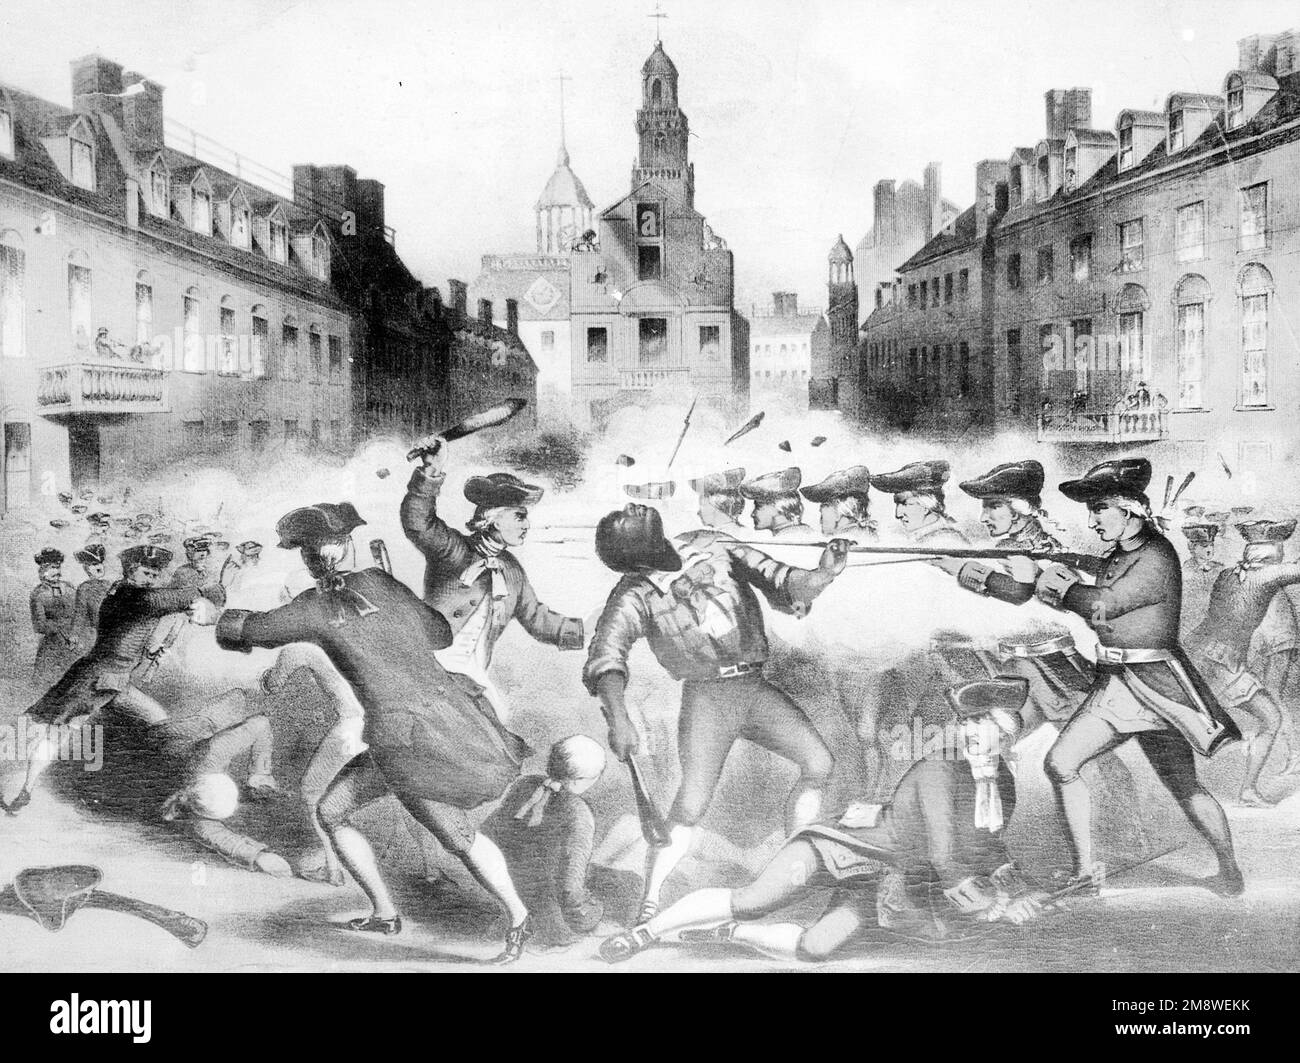 Boston Massacre, The Boston Massacre (known in Great Britain as the Incident on King Street[1]) was a confrontation in Boston on March 5, 1770, in which a group of nine British soldiers shot five people out of a crowd of three or four hundred who were harassing them verbally and throwing various projectiles. The event was heavily publicized as "a massacre" by leading Patriots such as Paul Revere and Samuel Adams.[2][3][4] British troops had been stationed in the Province of Massachusetts Bay since 1768 in order to support cr Stock Photo